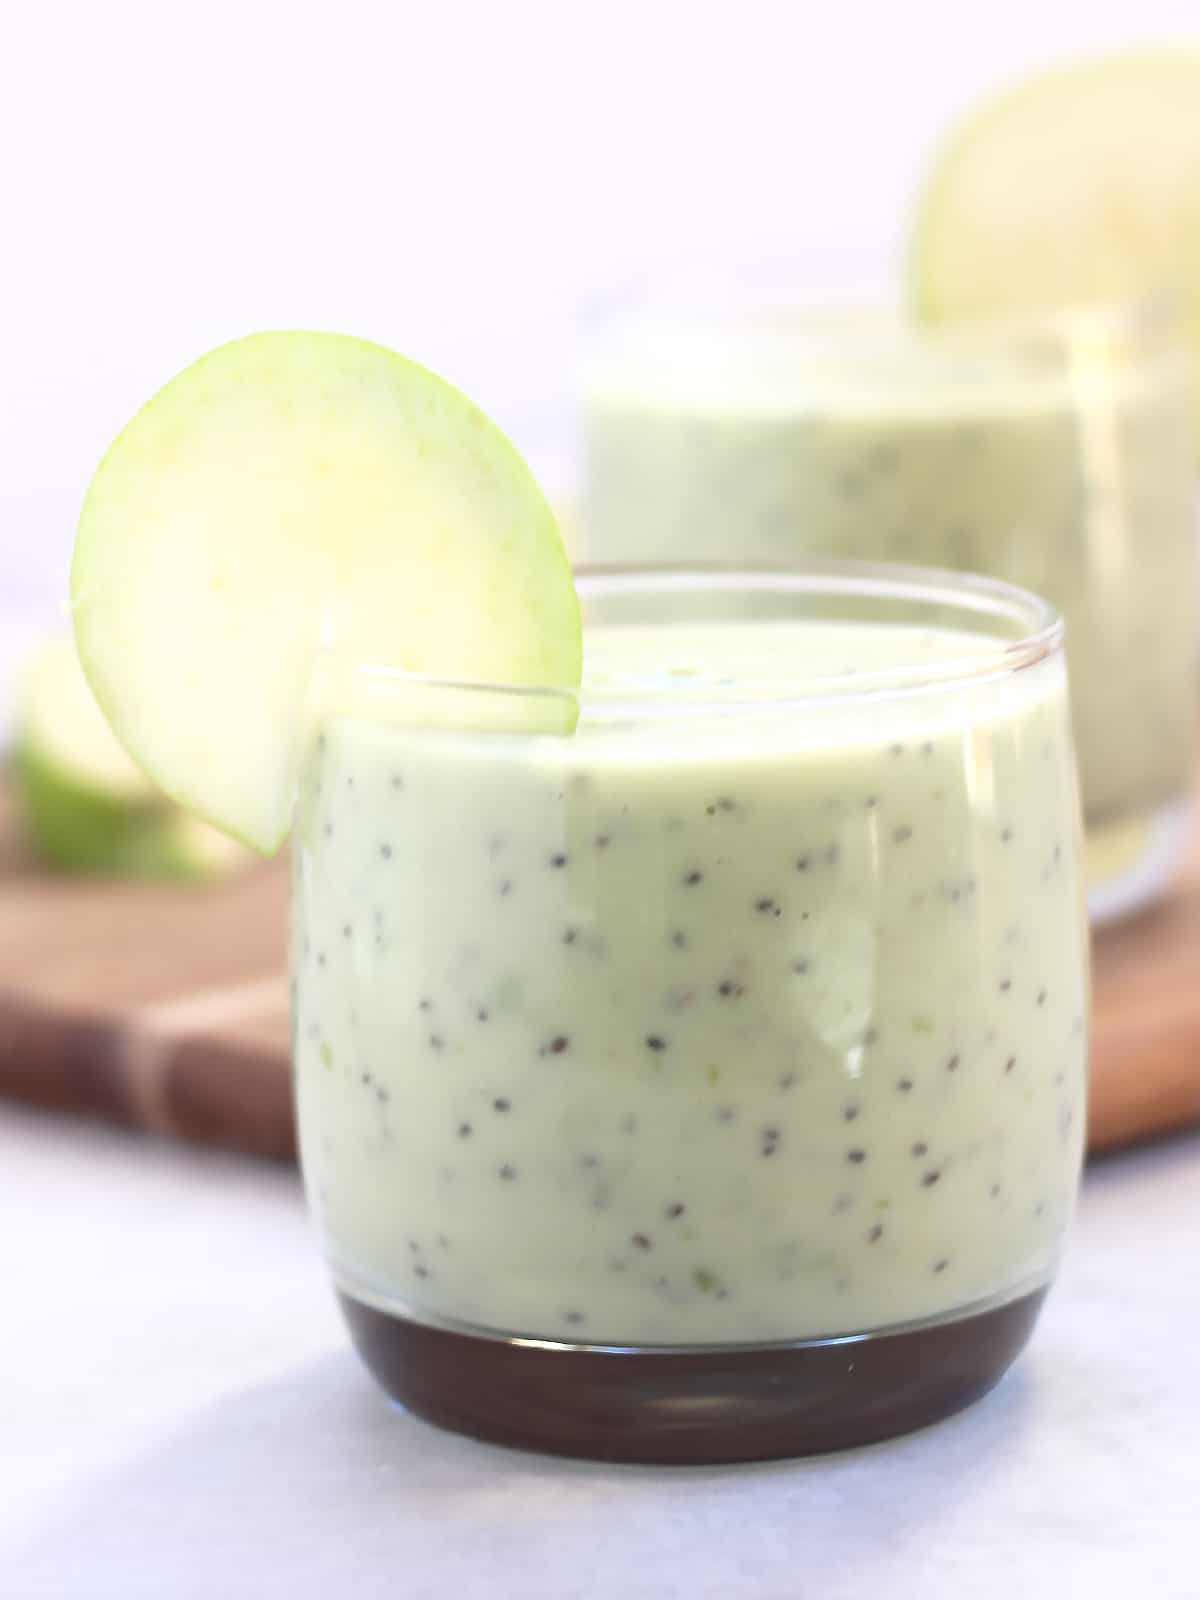 An apple avocado smoothie with chia seeds served in a short glass.